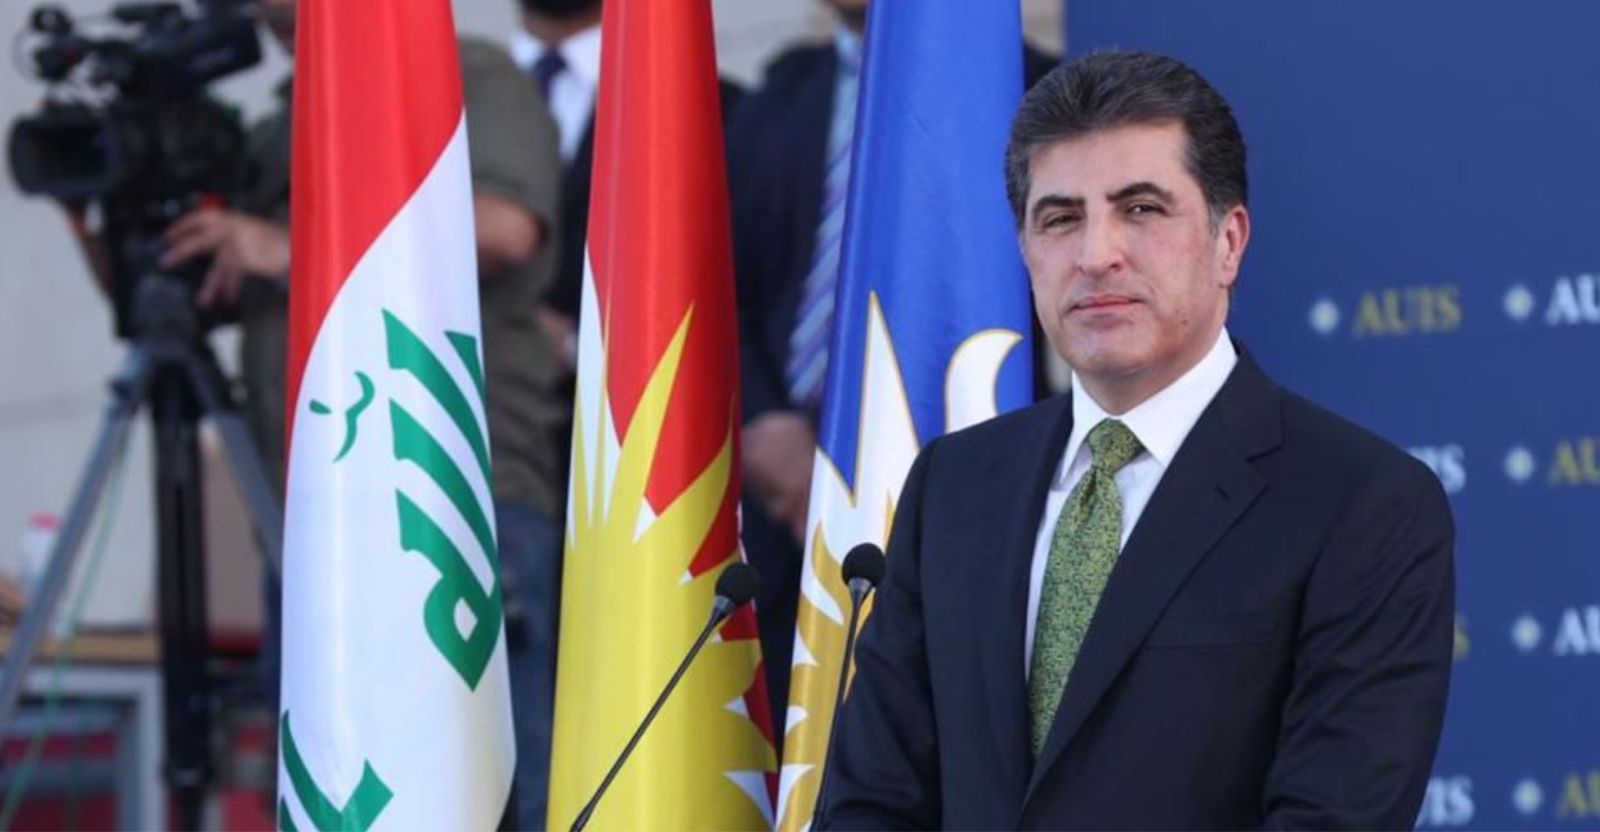 KRG President demands compensation for Halabja victims on th anniversary